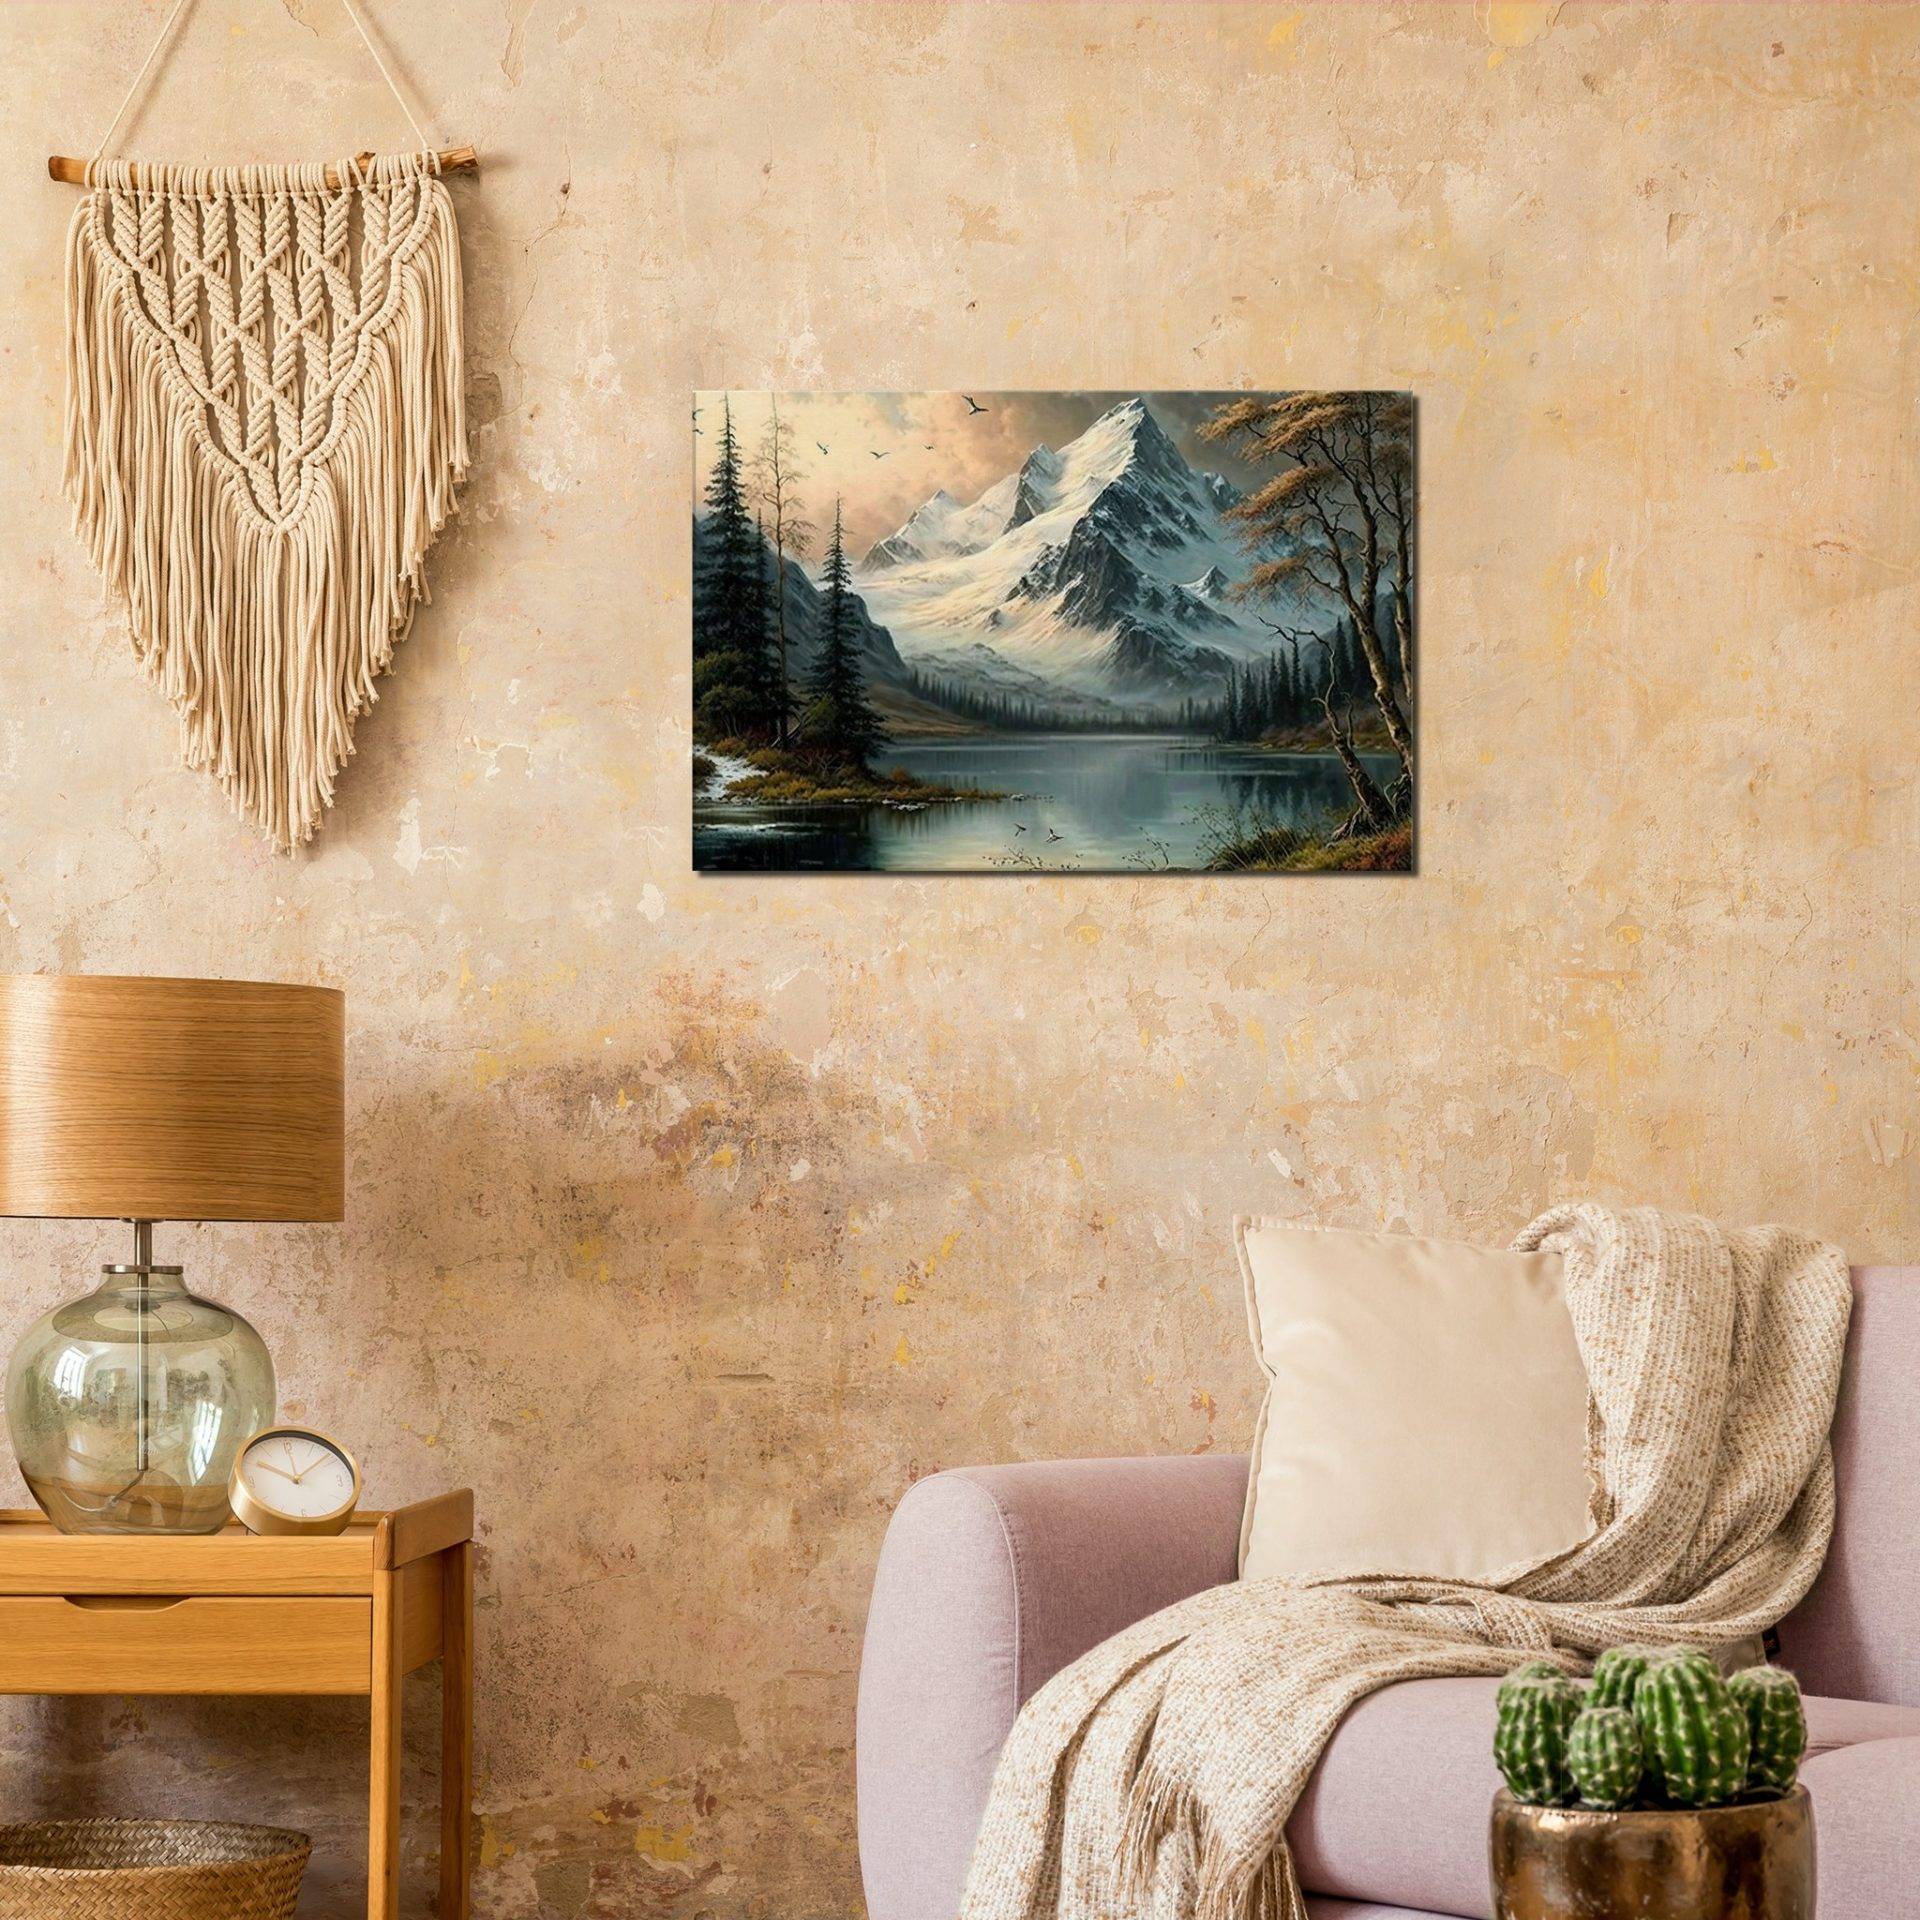 Tessin Landscape 8 (Canvas Print) Fabled Gallery https://fabledgallery.art/?post_type=product&p=37142